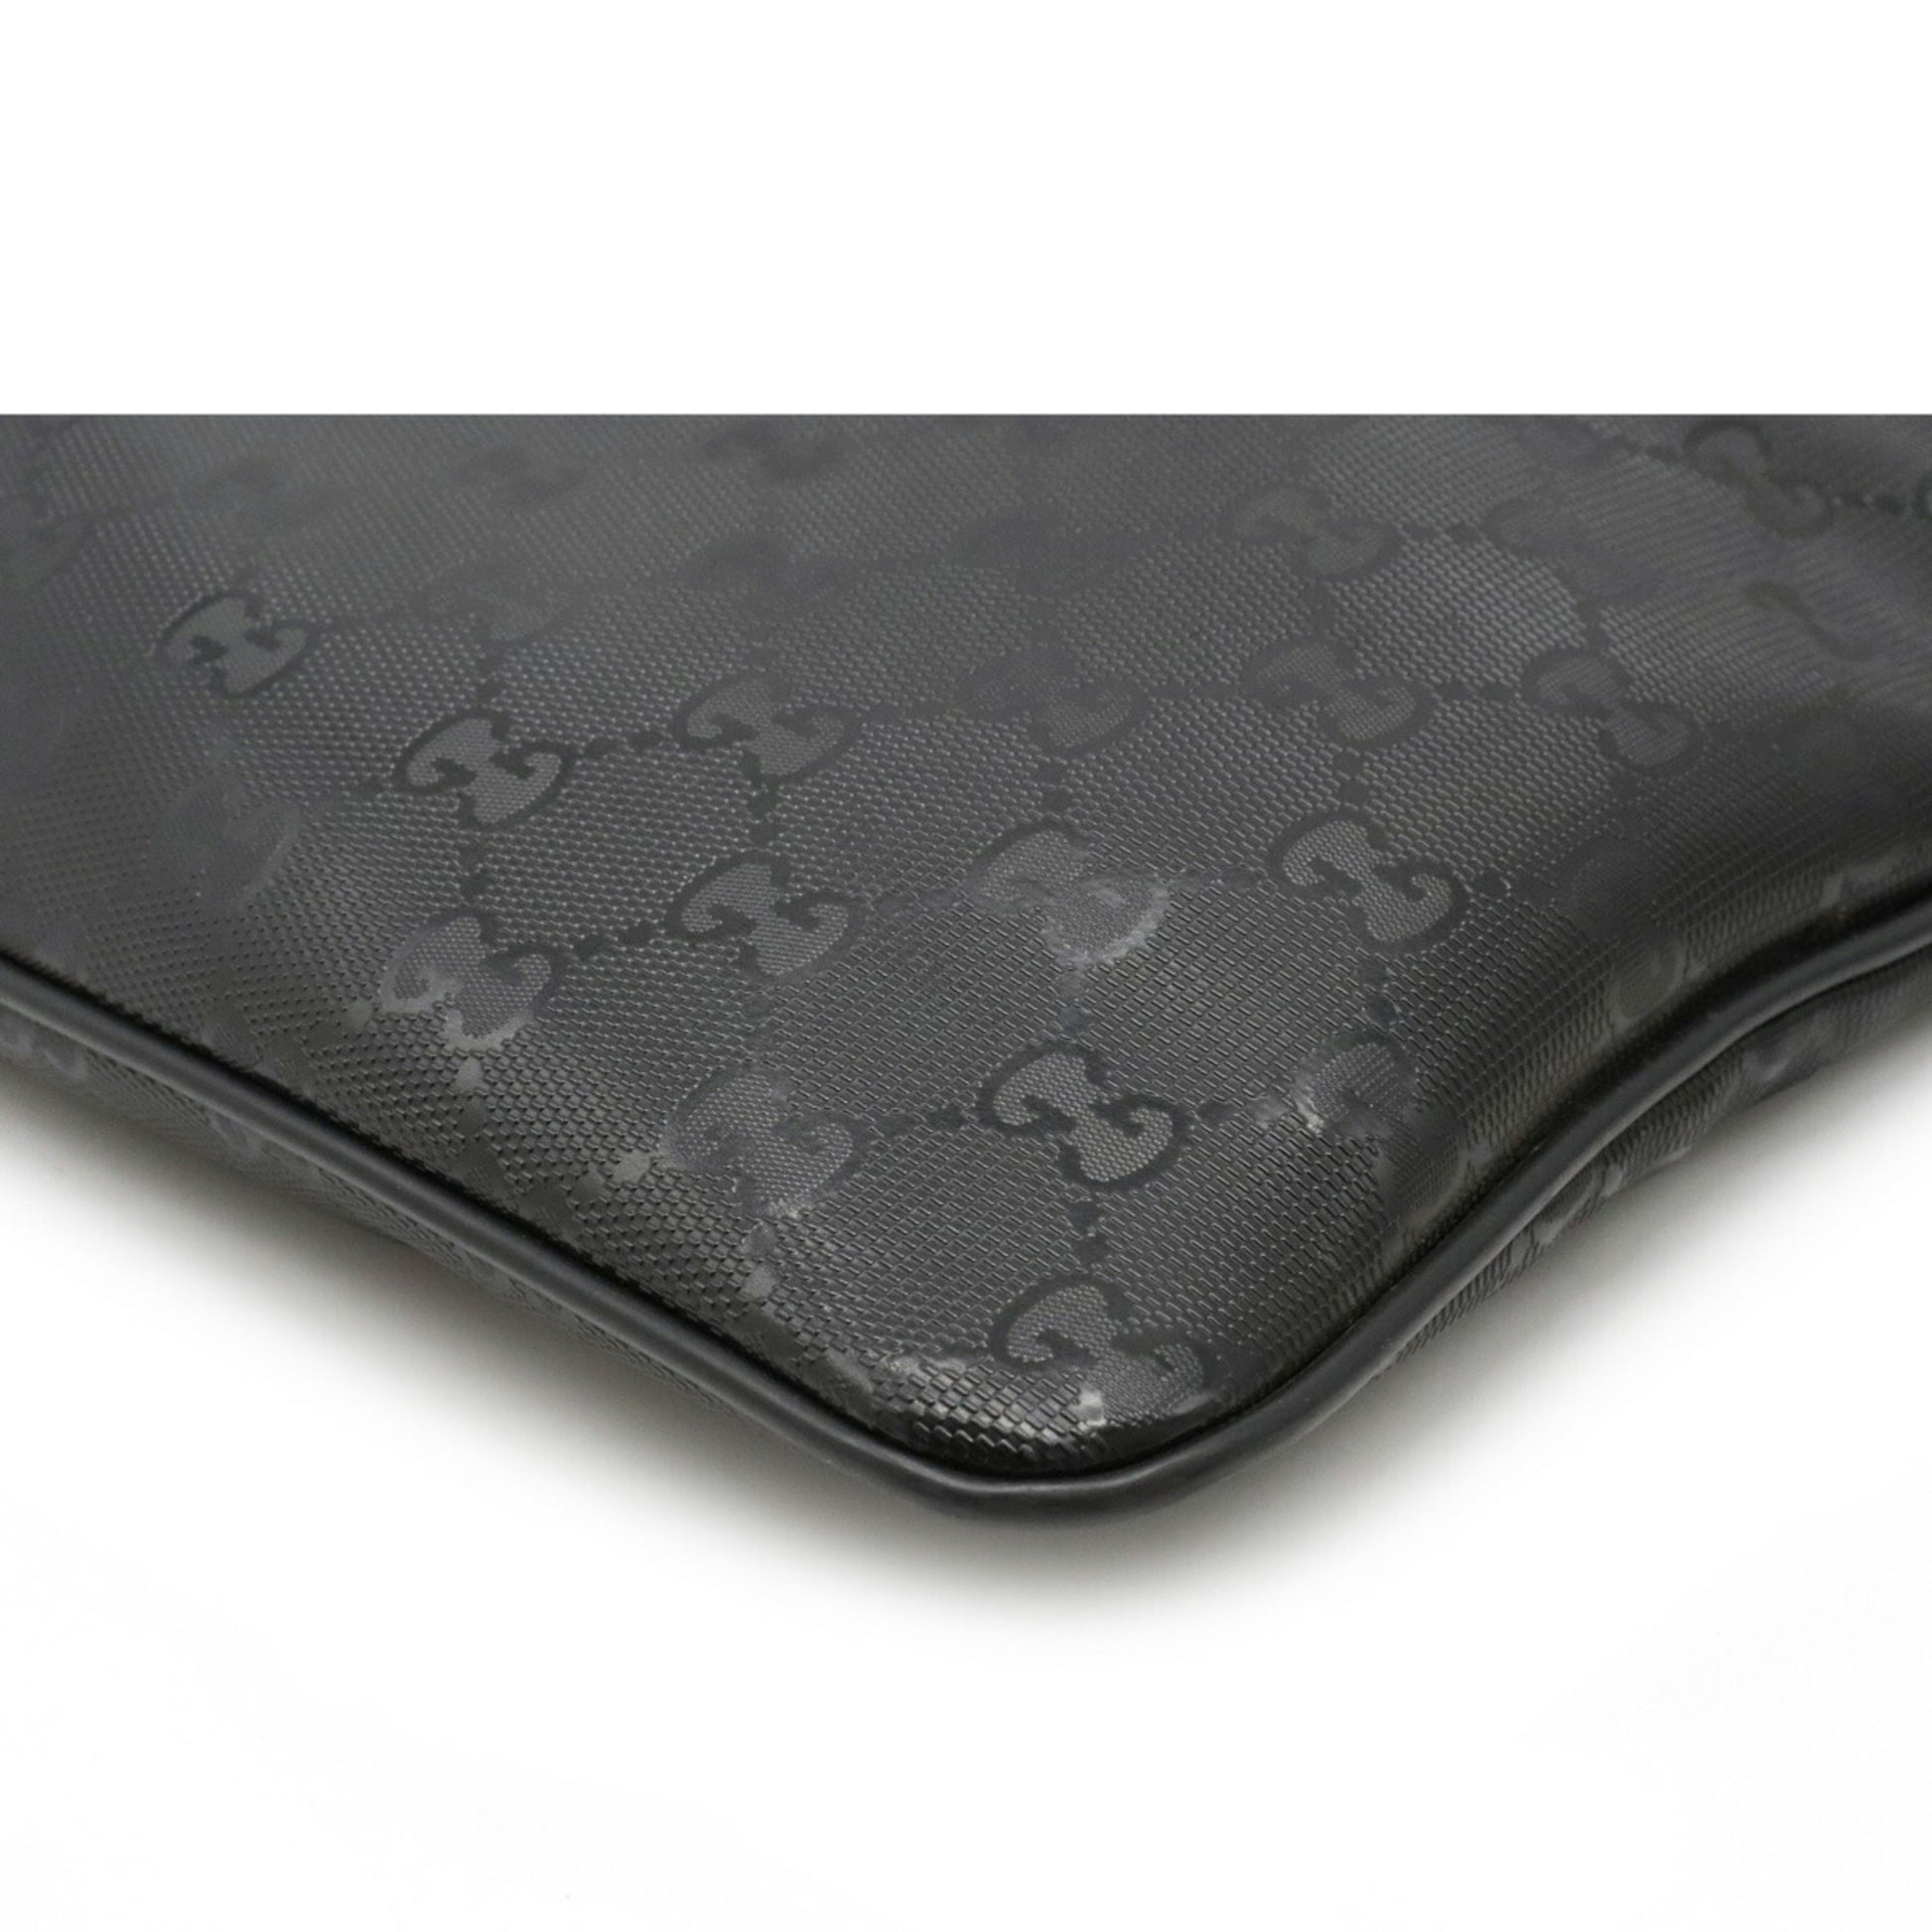 Nano Noé Monogram Canvas - Wallets and Small Leather Goods